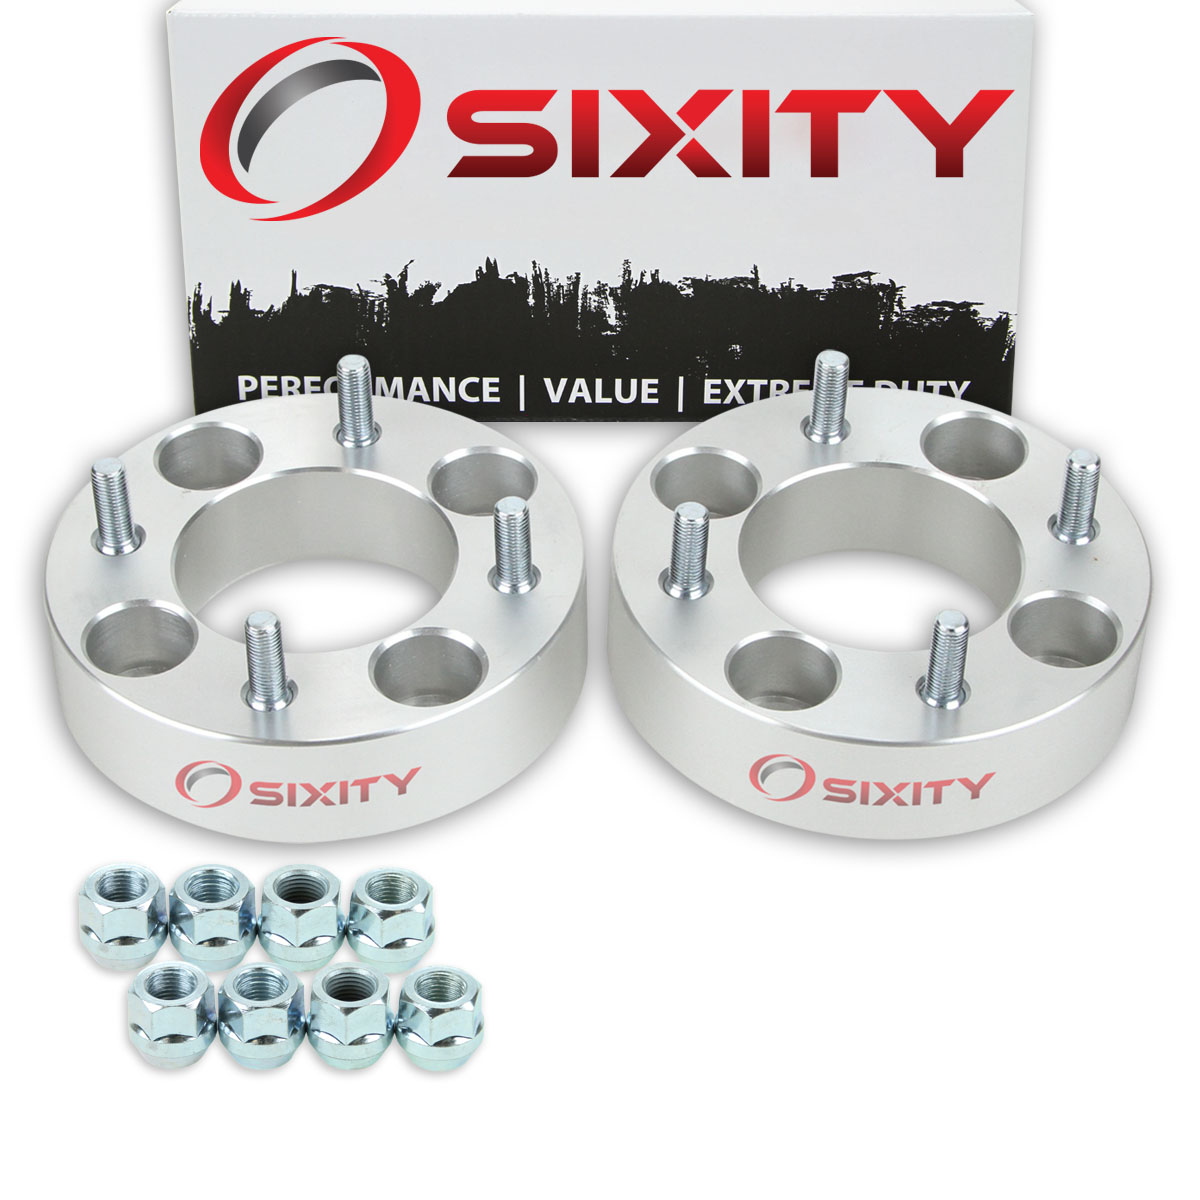 Sixity 2 pc 1.5 Inch Honda ATC 200X 250 250R Big Red 4/110 Rear Wheel Spacers